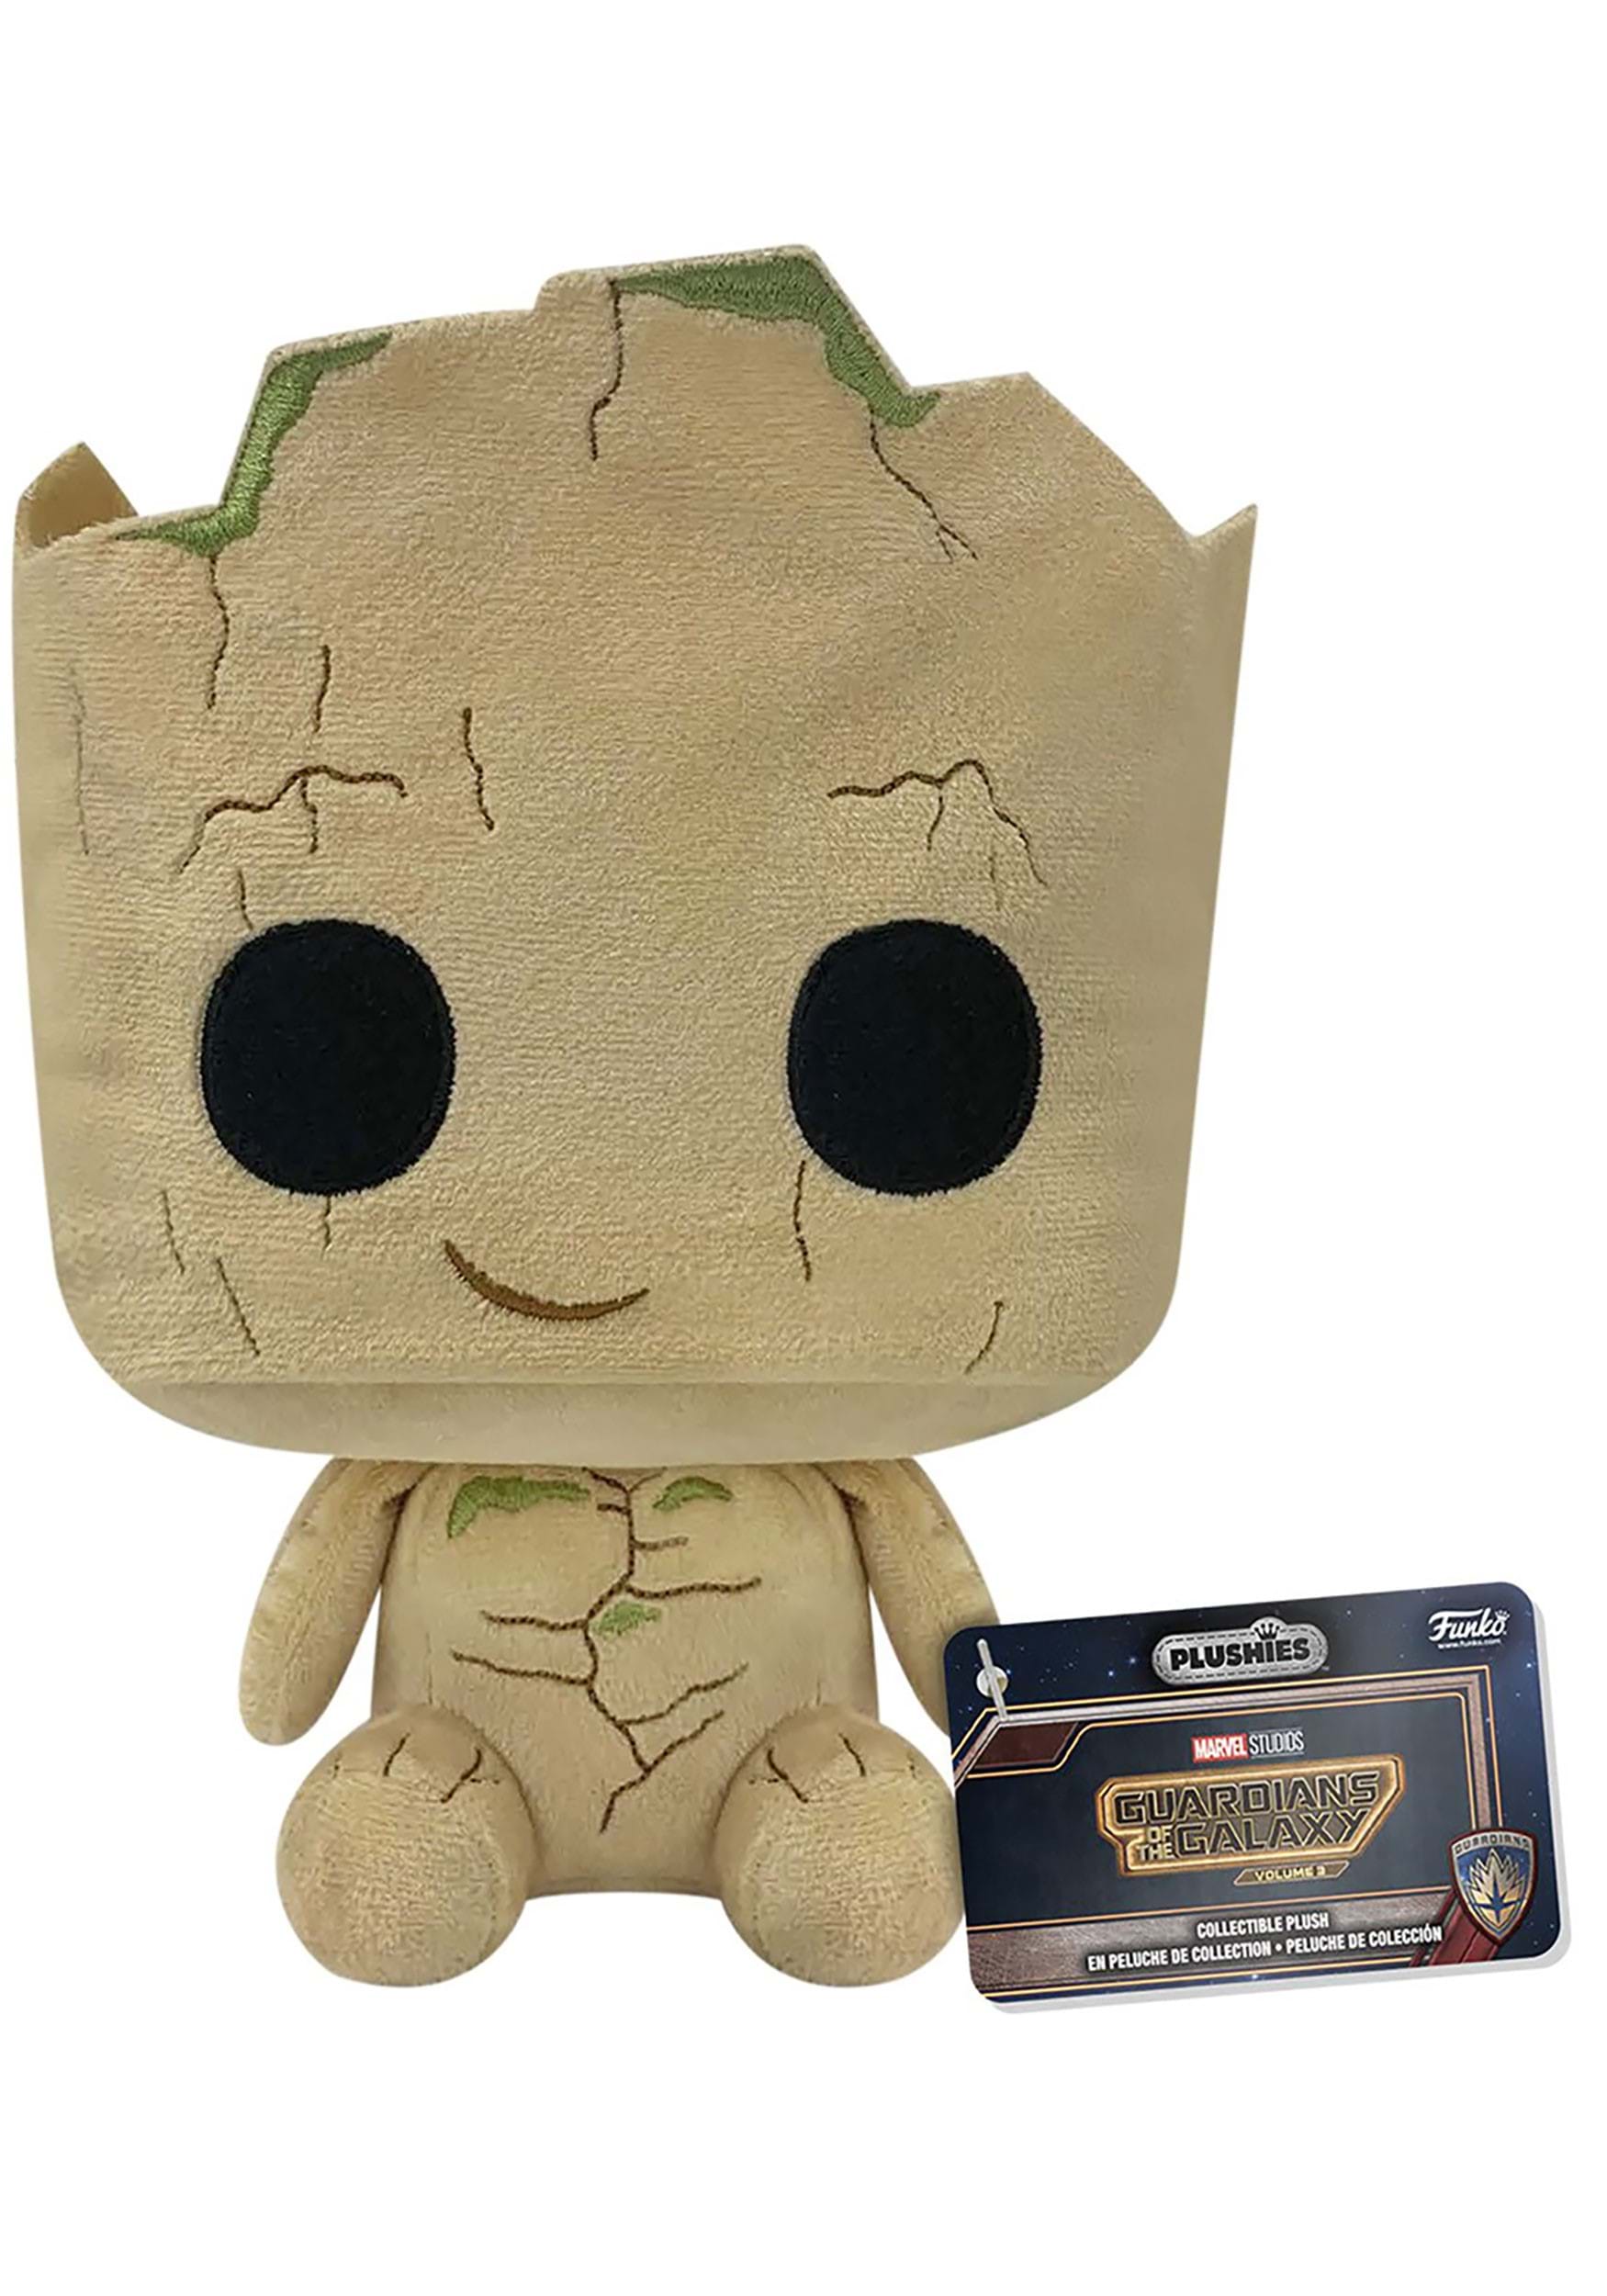 FUNKO POP 01 GUARDIANS OF THE GALAXY GROOT SUPER SIZED